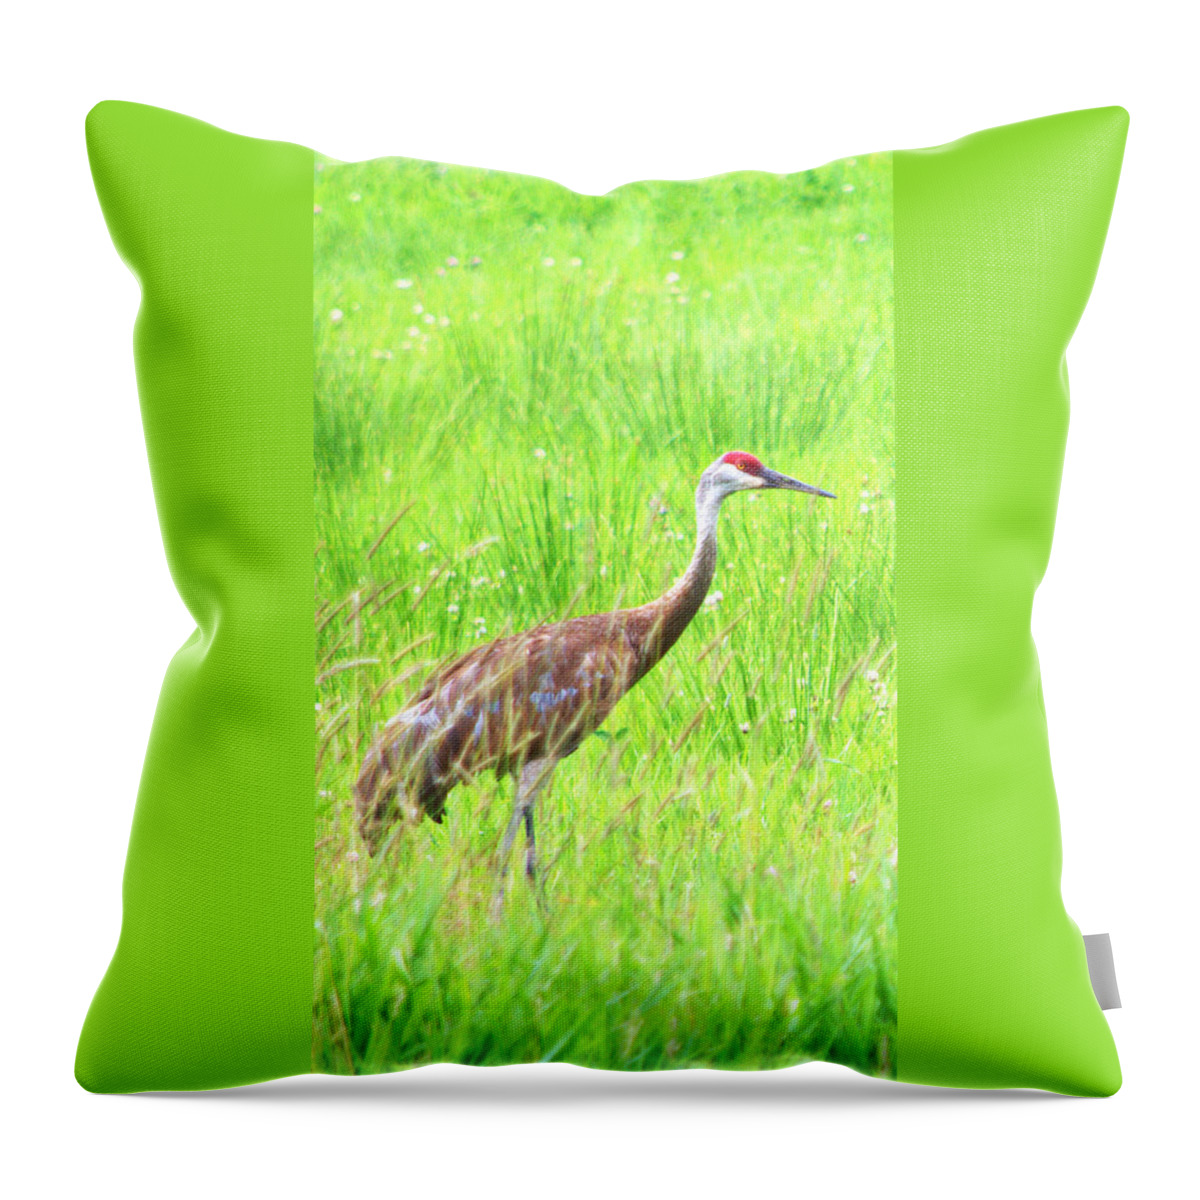  Throw Pillow featuring the photograph Common Crane Hide by Kimberly Woyak